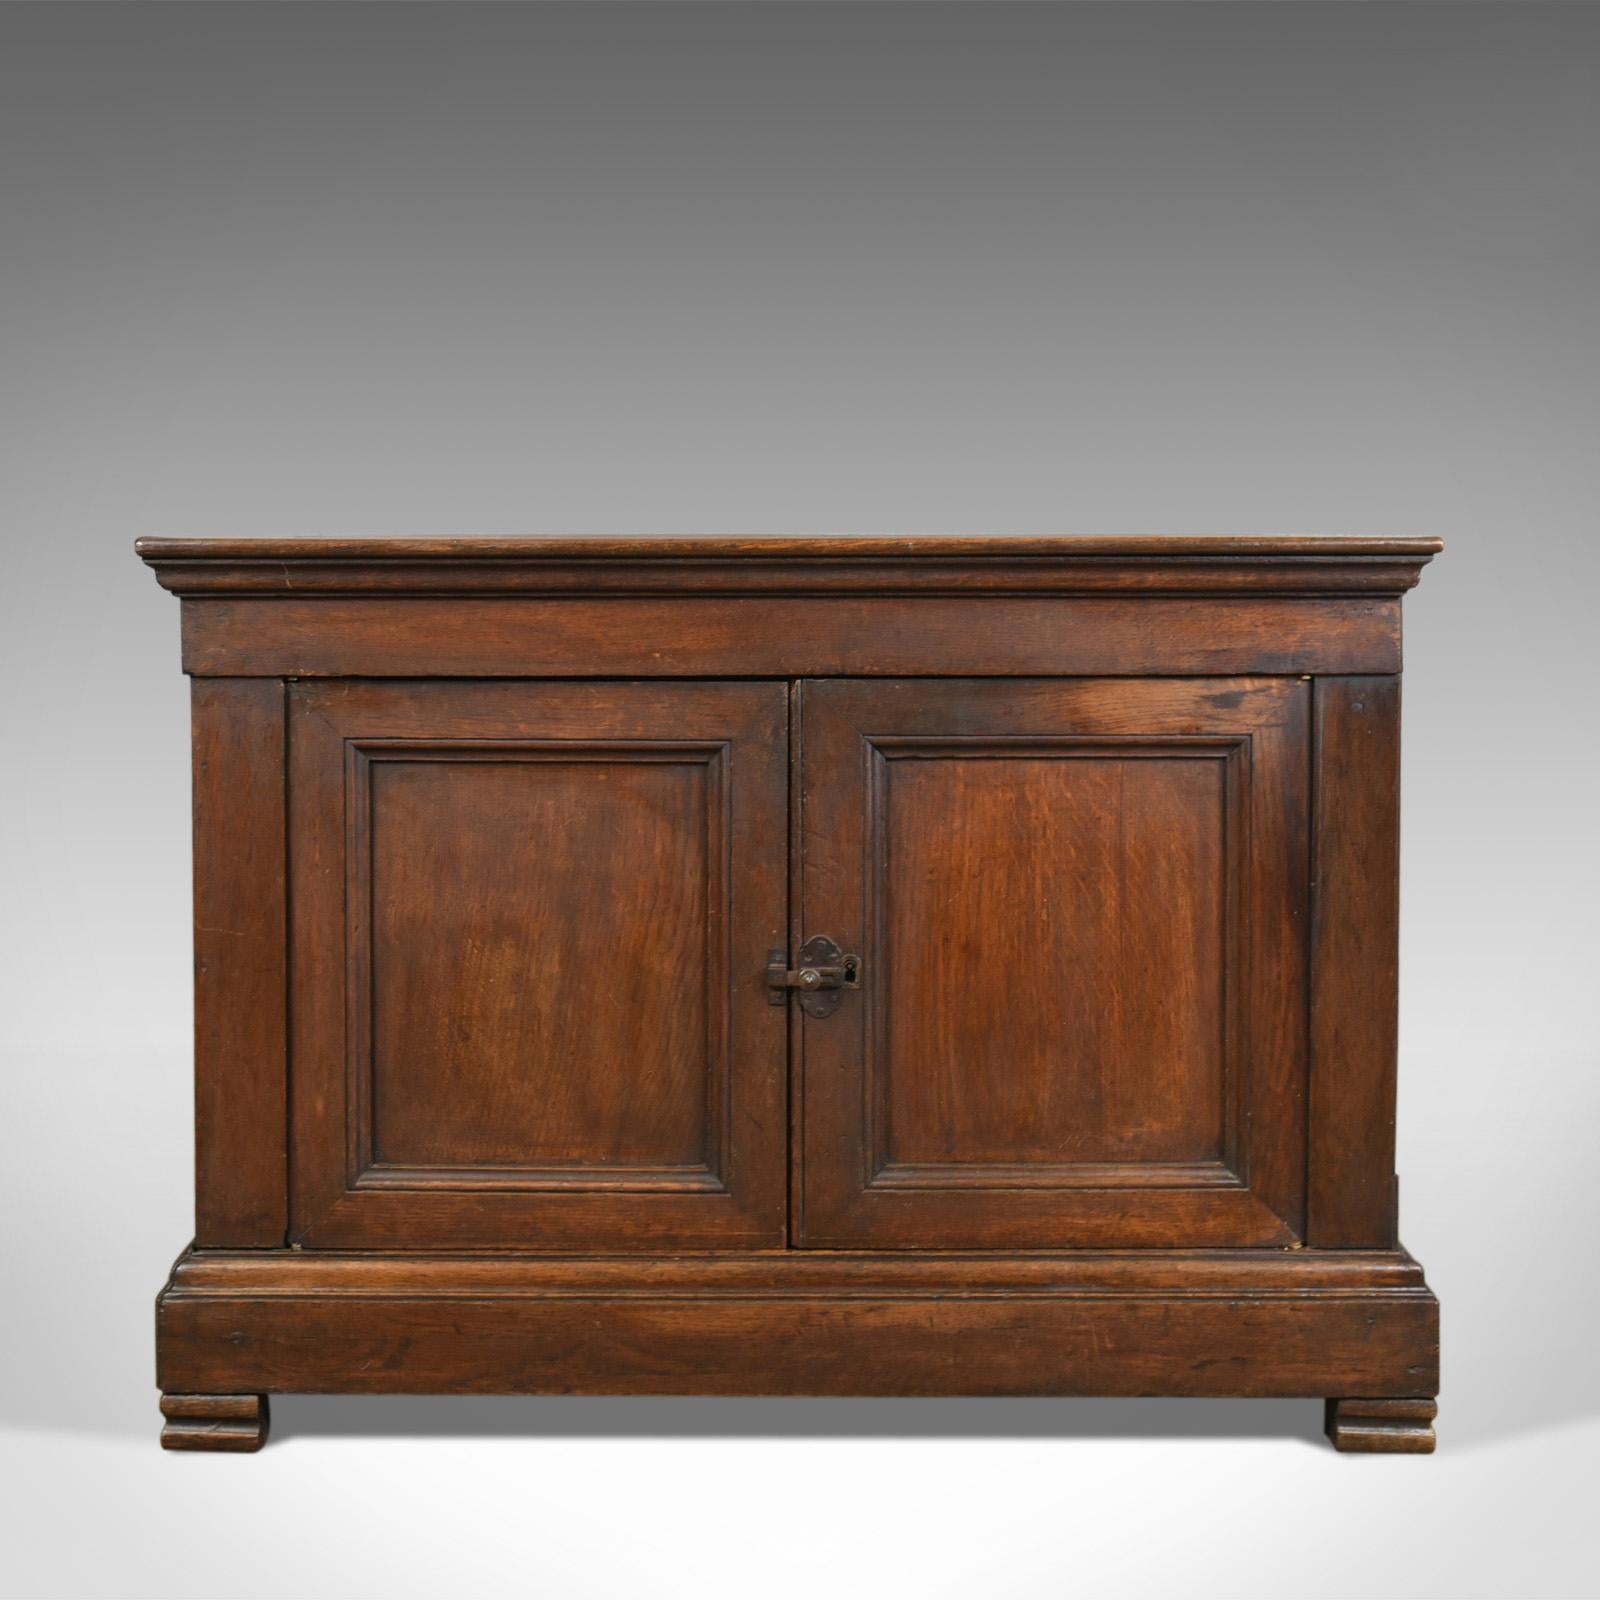 This is an antique cabinet, a 19th century, French, oak cabinet dating to circa 1850.

Attractive warm hues to the oak with an appealing aged patina
Plank top with attractive edge moulding detail
Continuous, broad plinth base raised on shaped